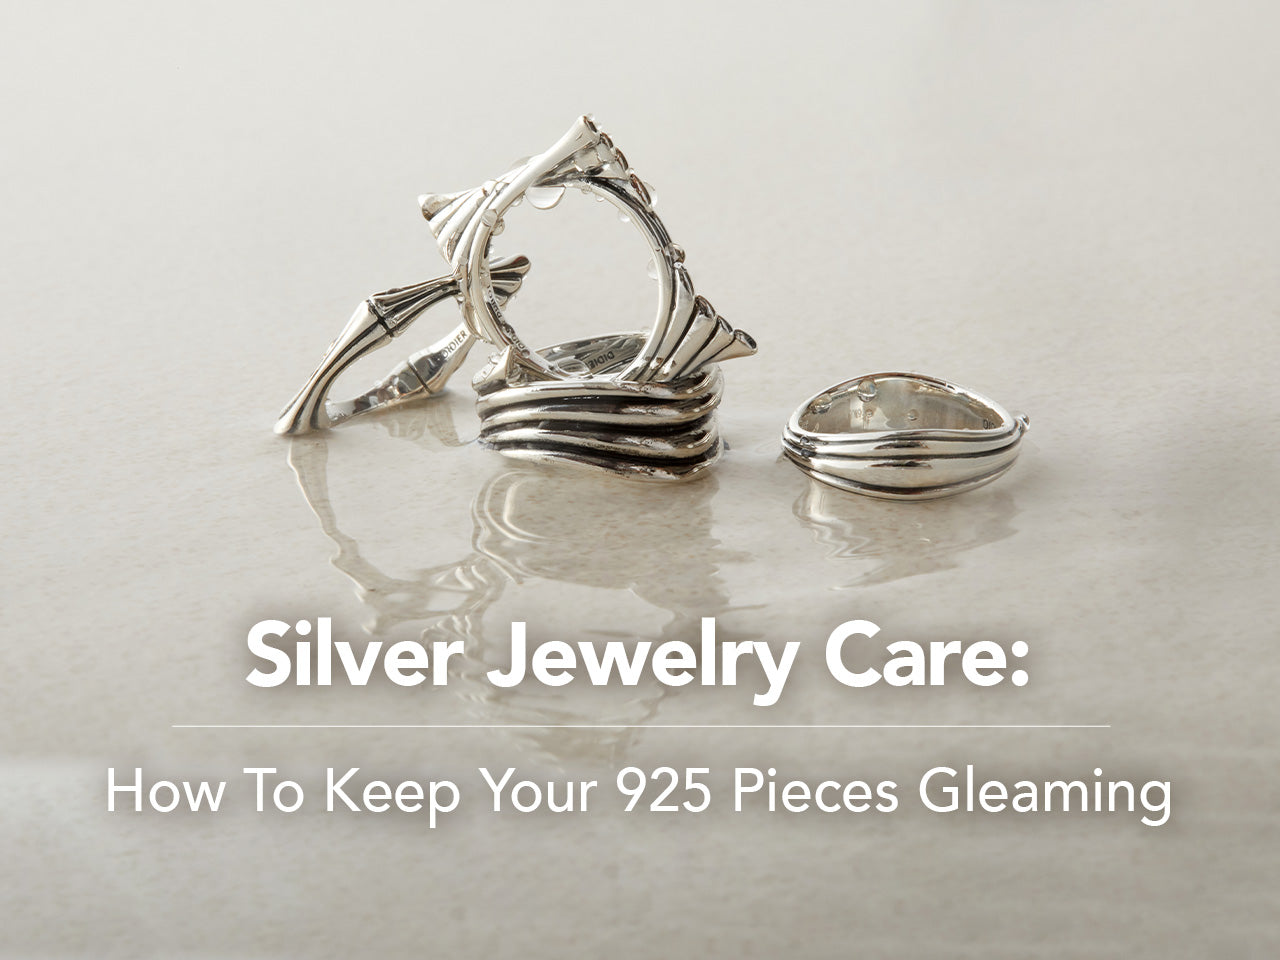 Silver Jewelry Care: How To Keep Your 925 Pieces Gleaming